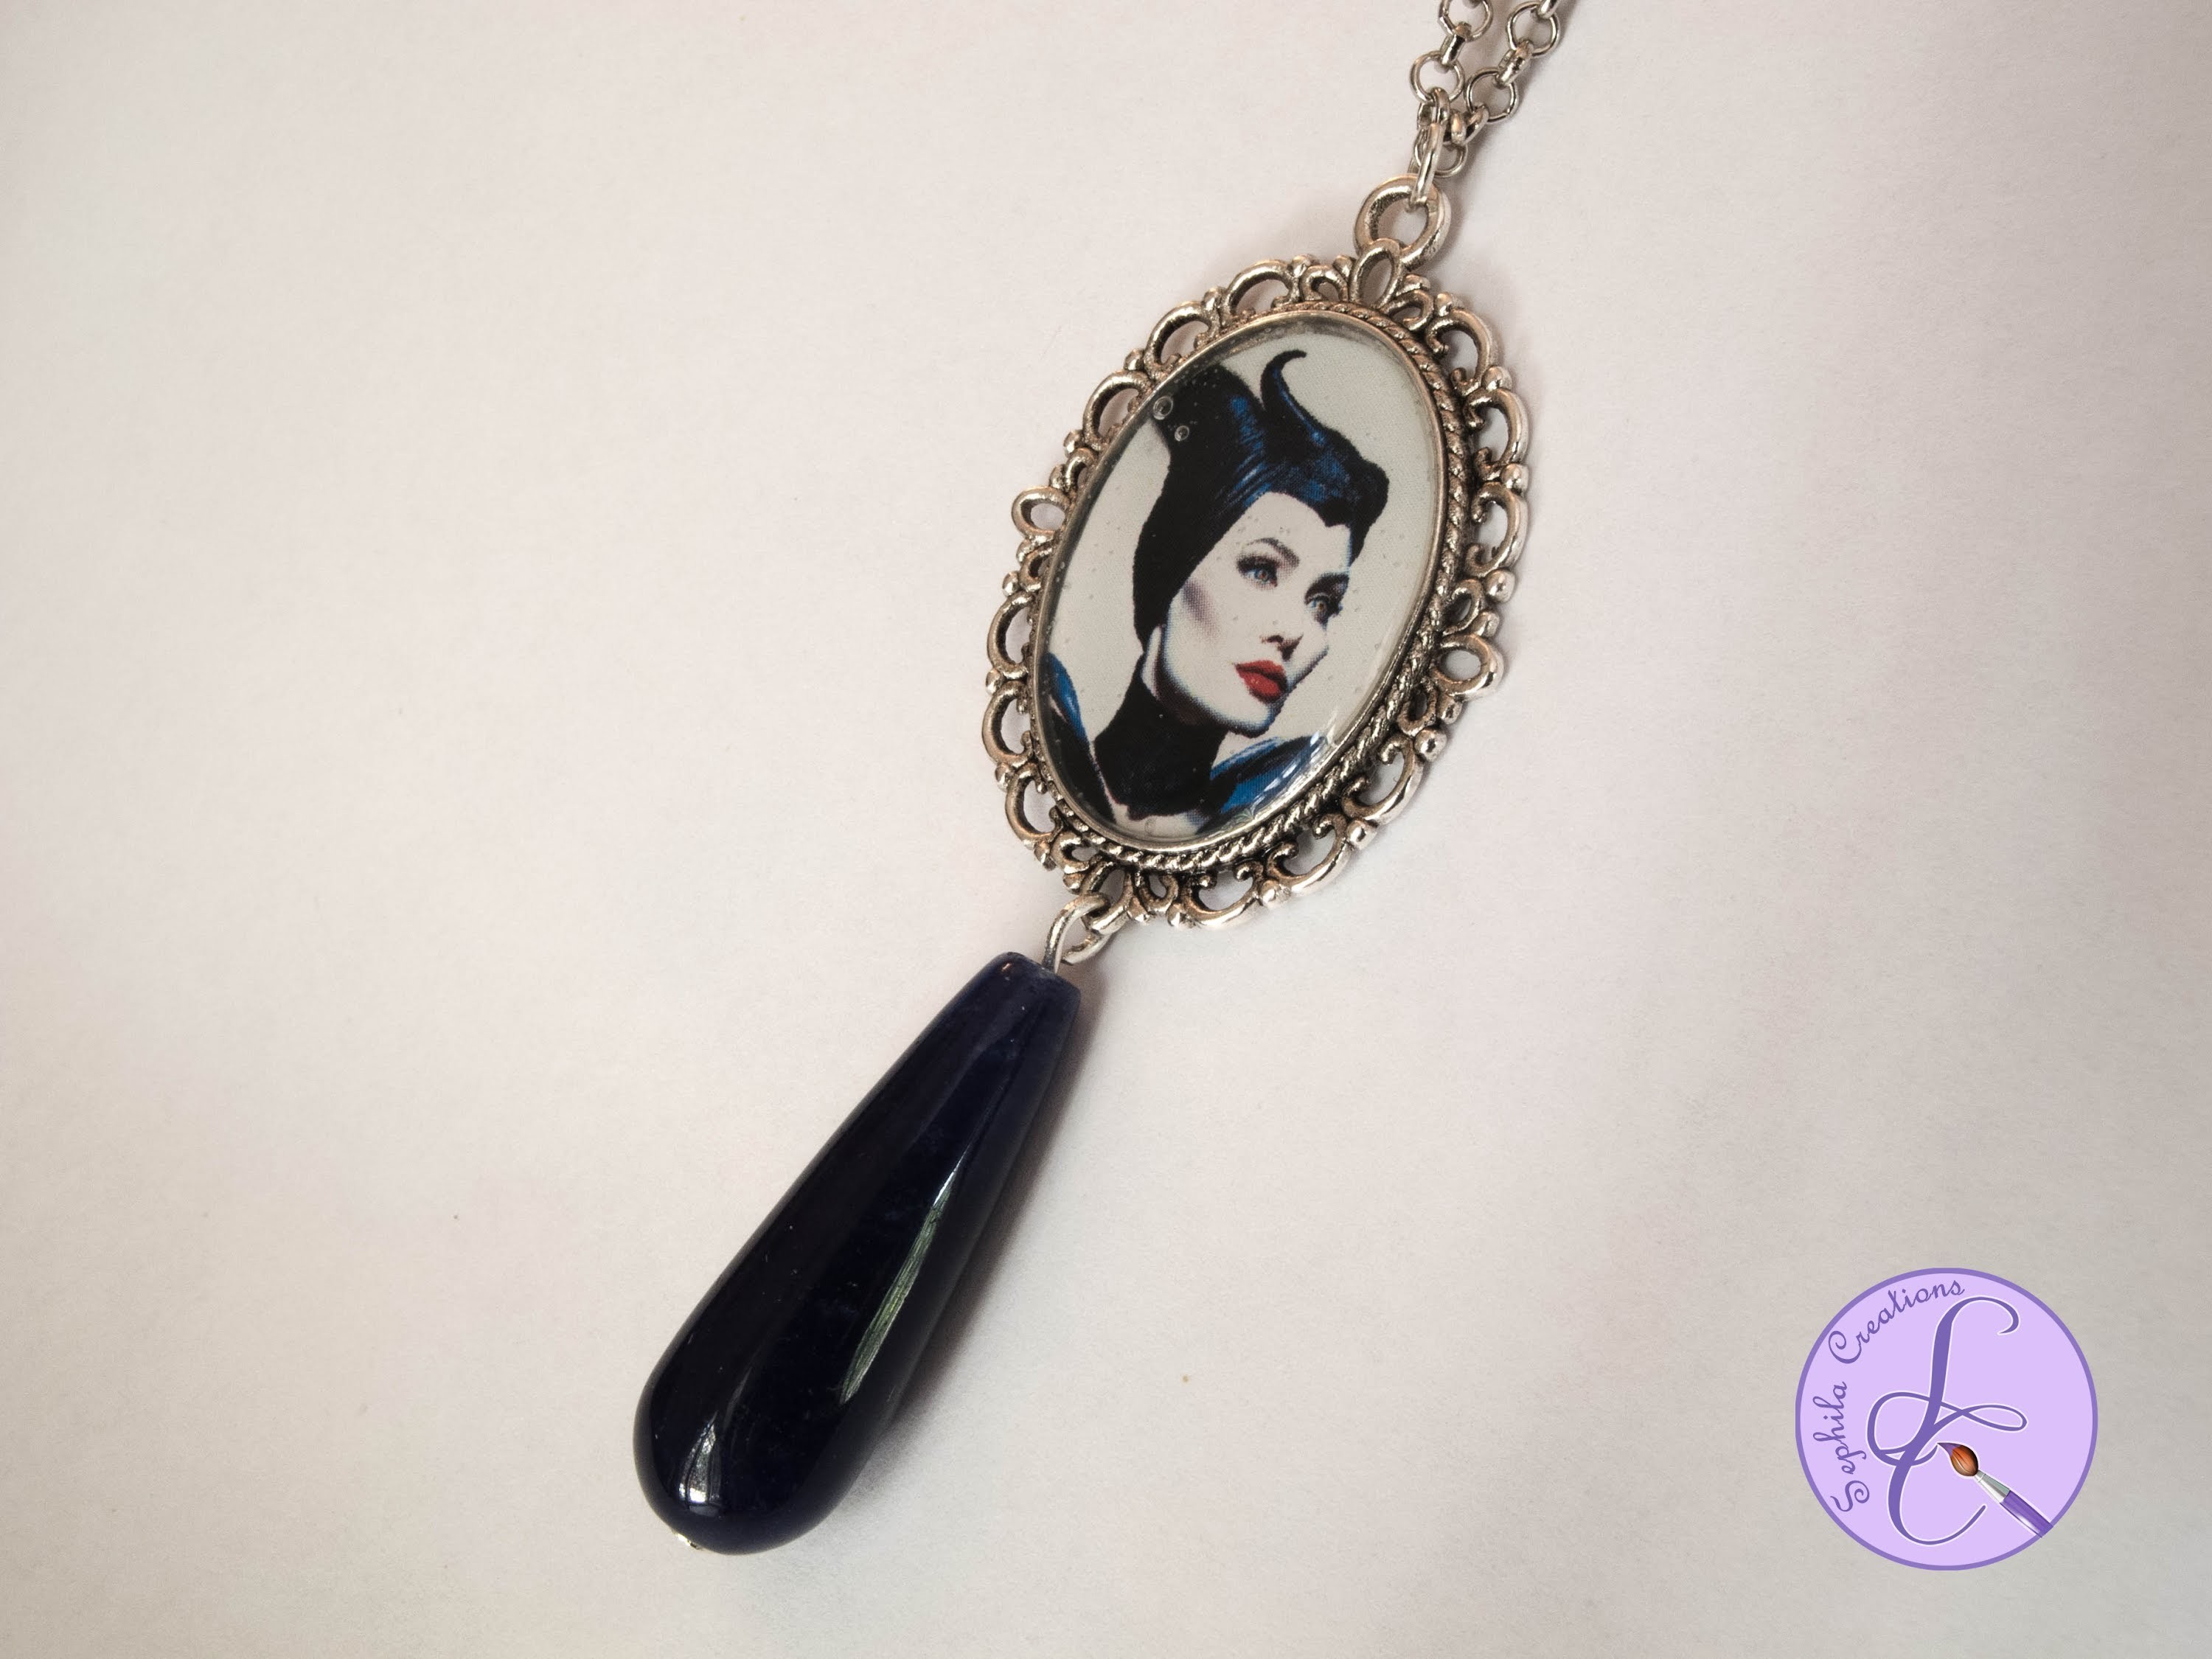 Tutorial: Cammeo con Malefica (Maleficent altered art cammeo) [eng-sub]